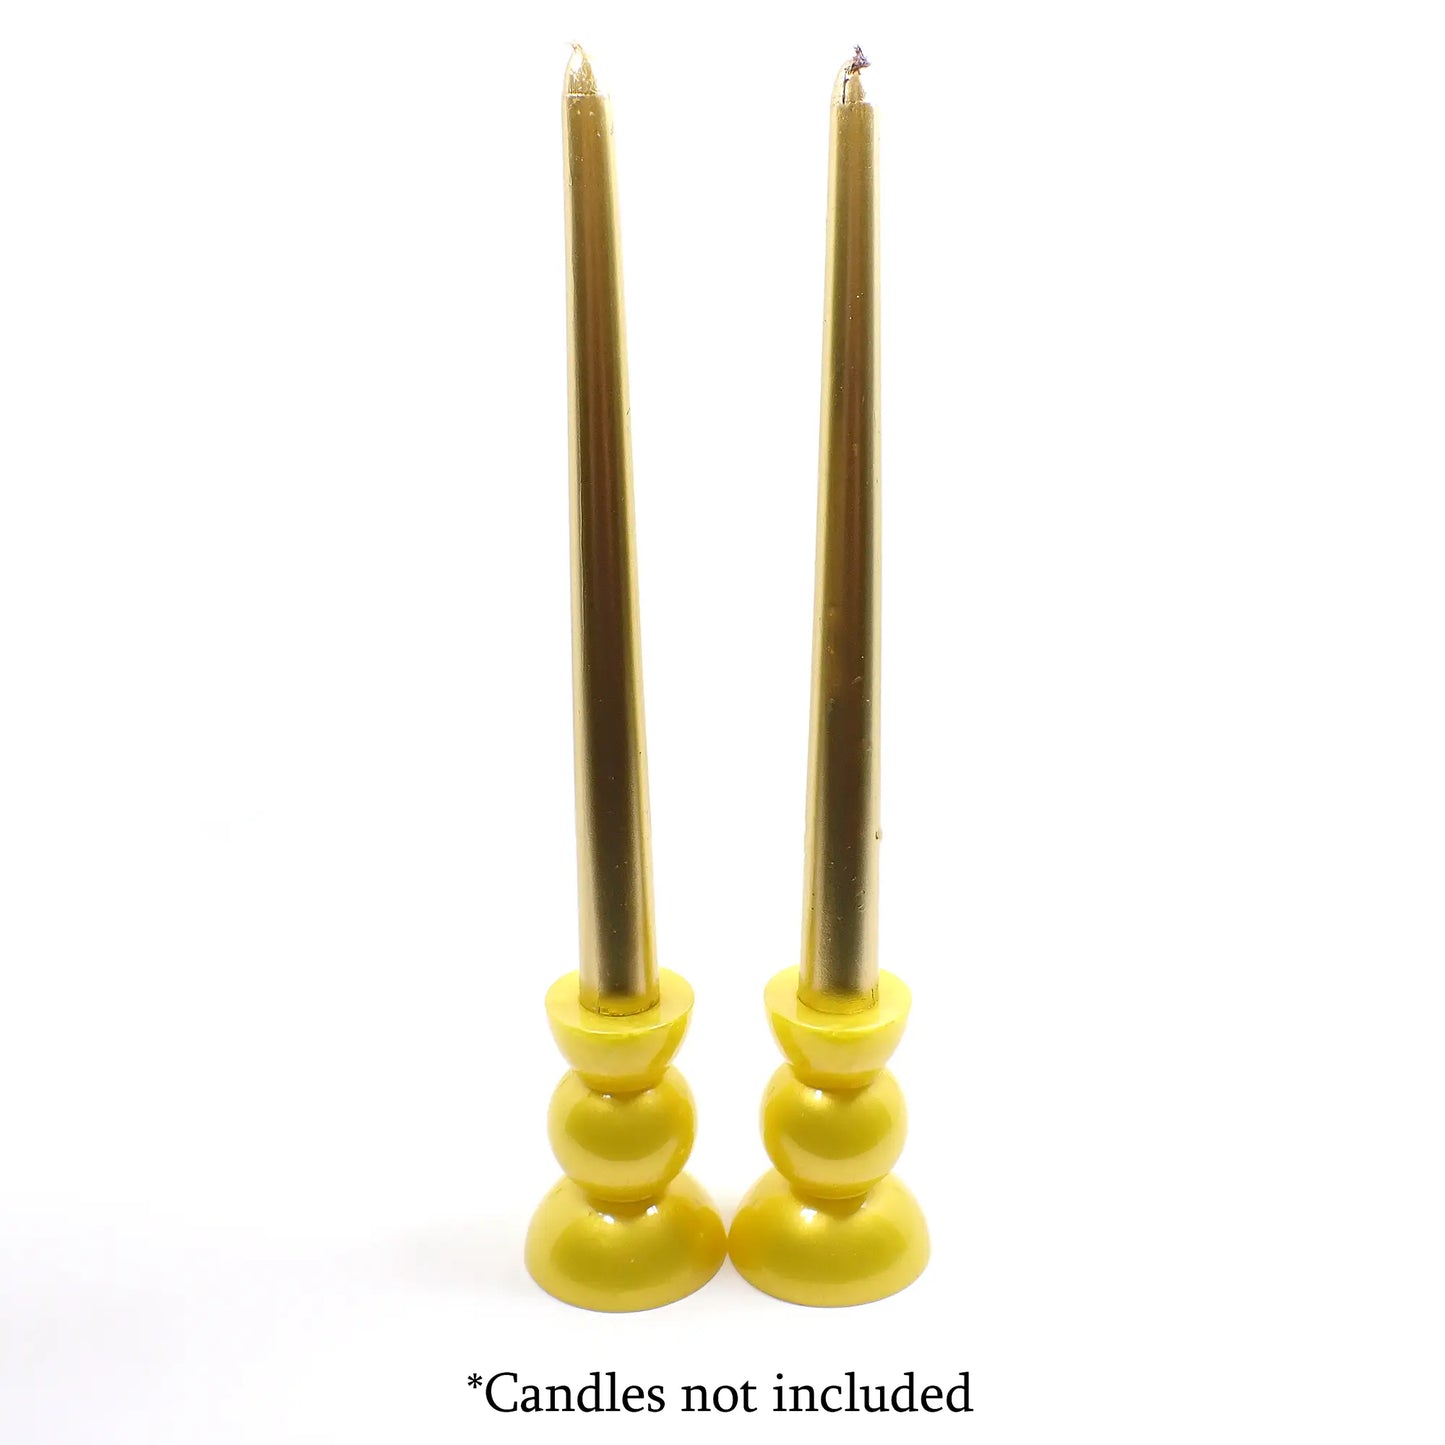 Set of Two Handmade Pearly Bright Yellow Resin Rounded Geometric Candlestick Holders